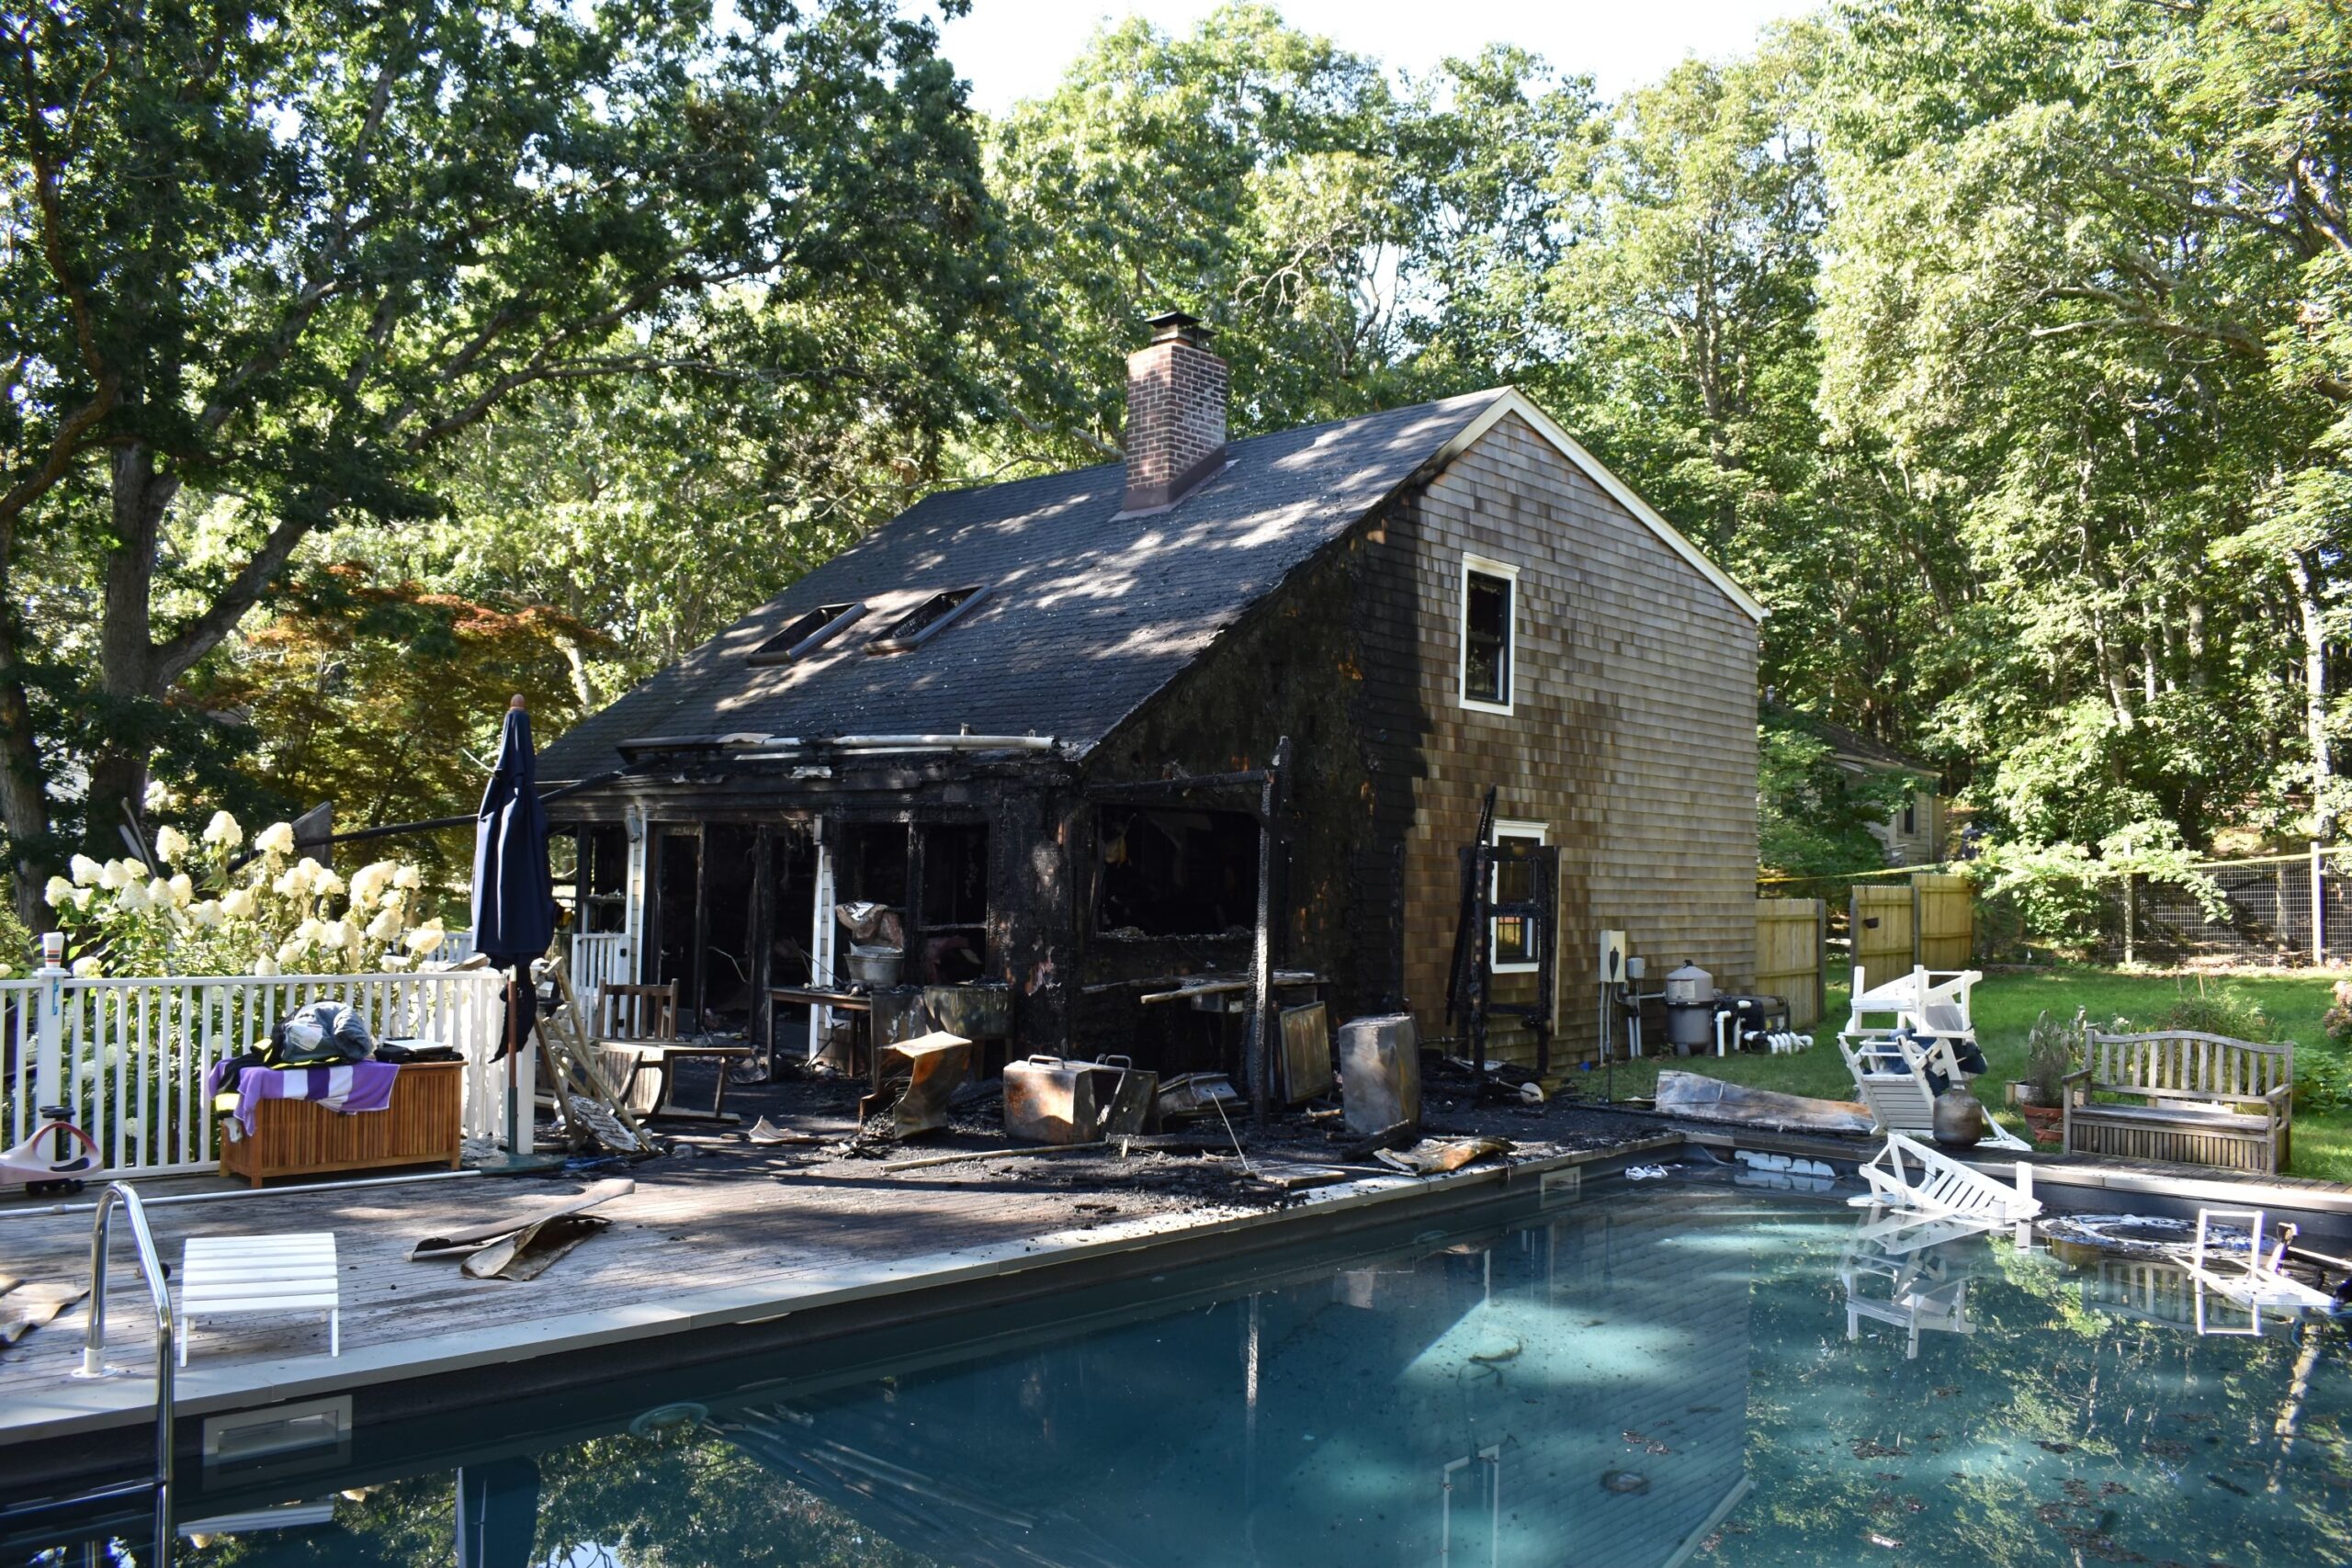 The rear of the Noyac home where two sisters died in an August fire. The girls' family has filed a lawsuit against the home's owners and the online rental company VRBO and HomeAway.com.